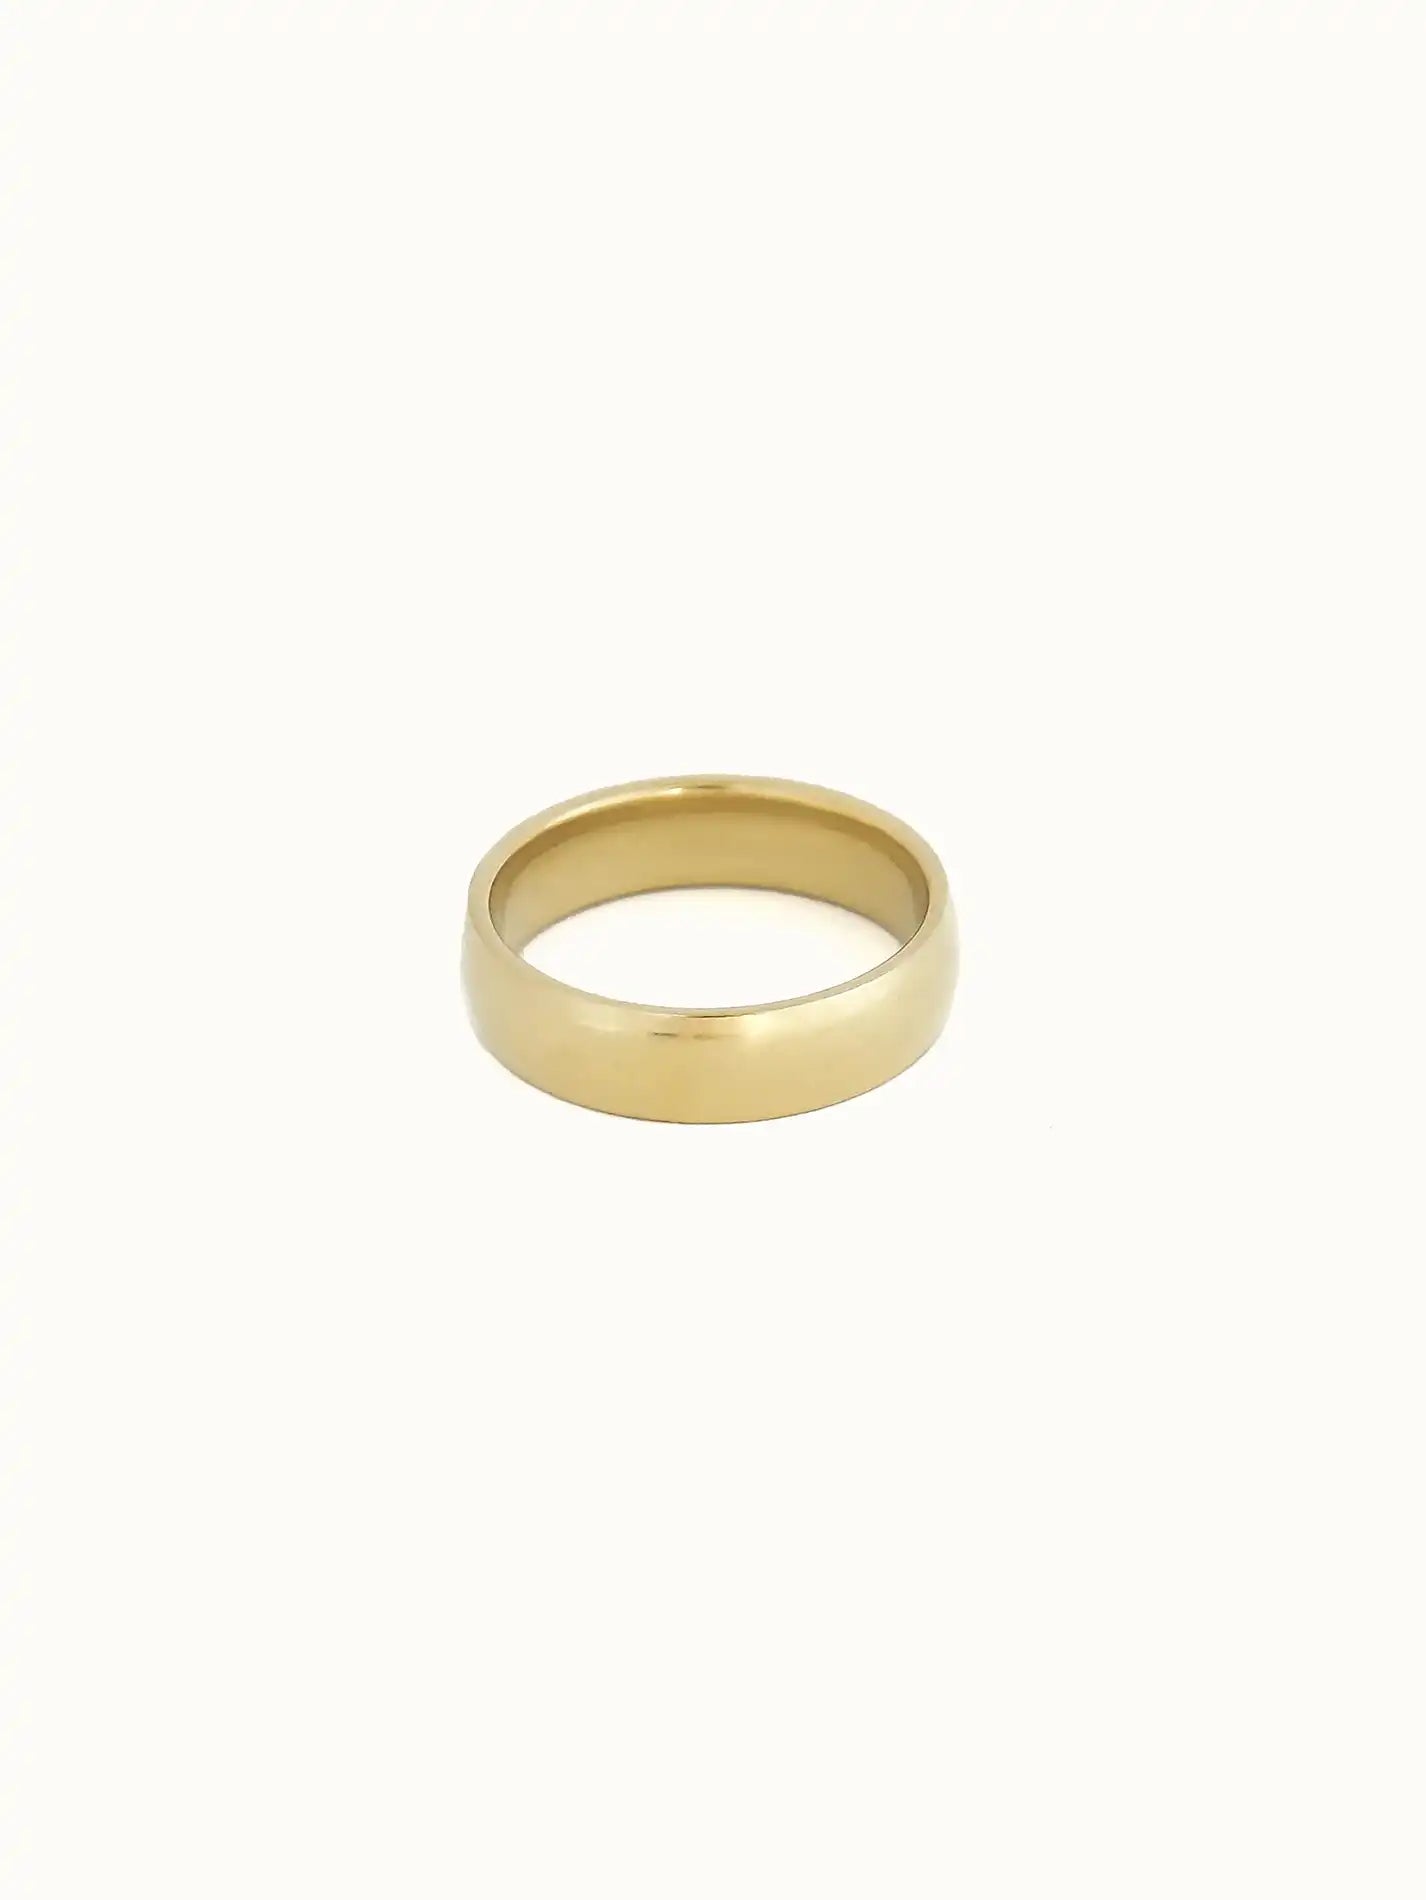 Classic cigar band ring solid yellow gold